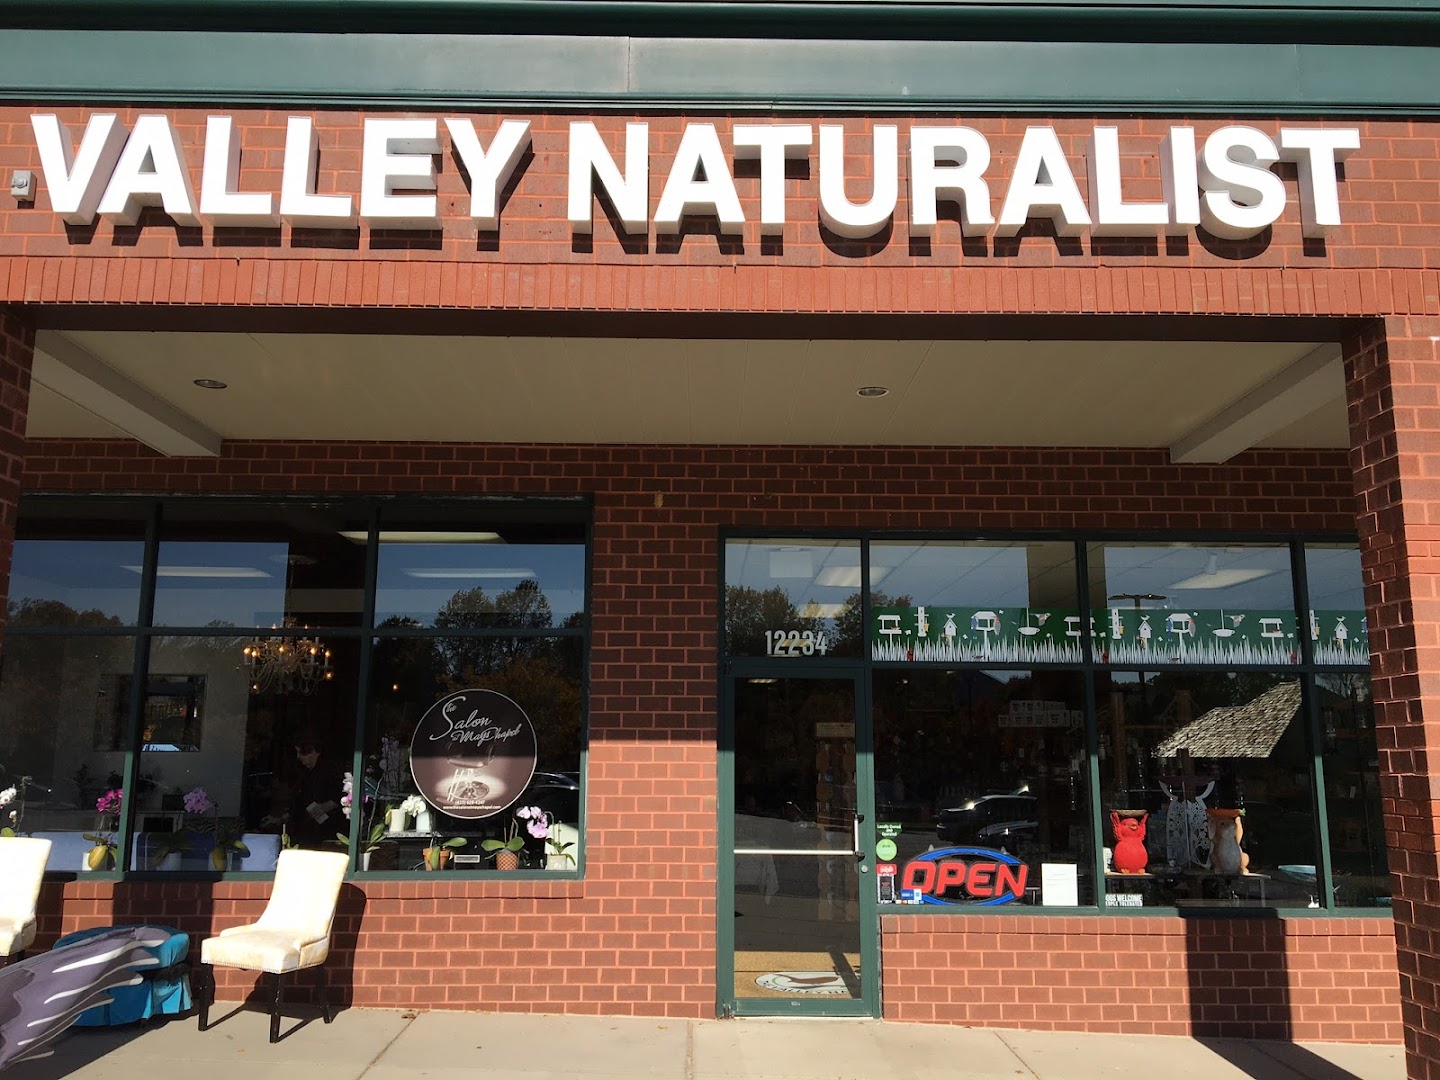 The Valley Naturalist